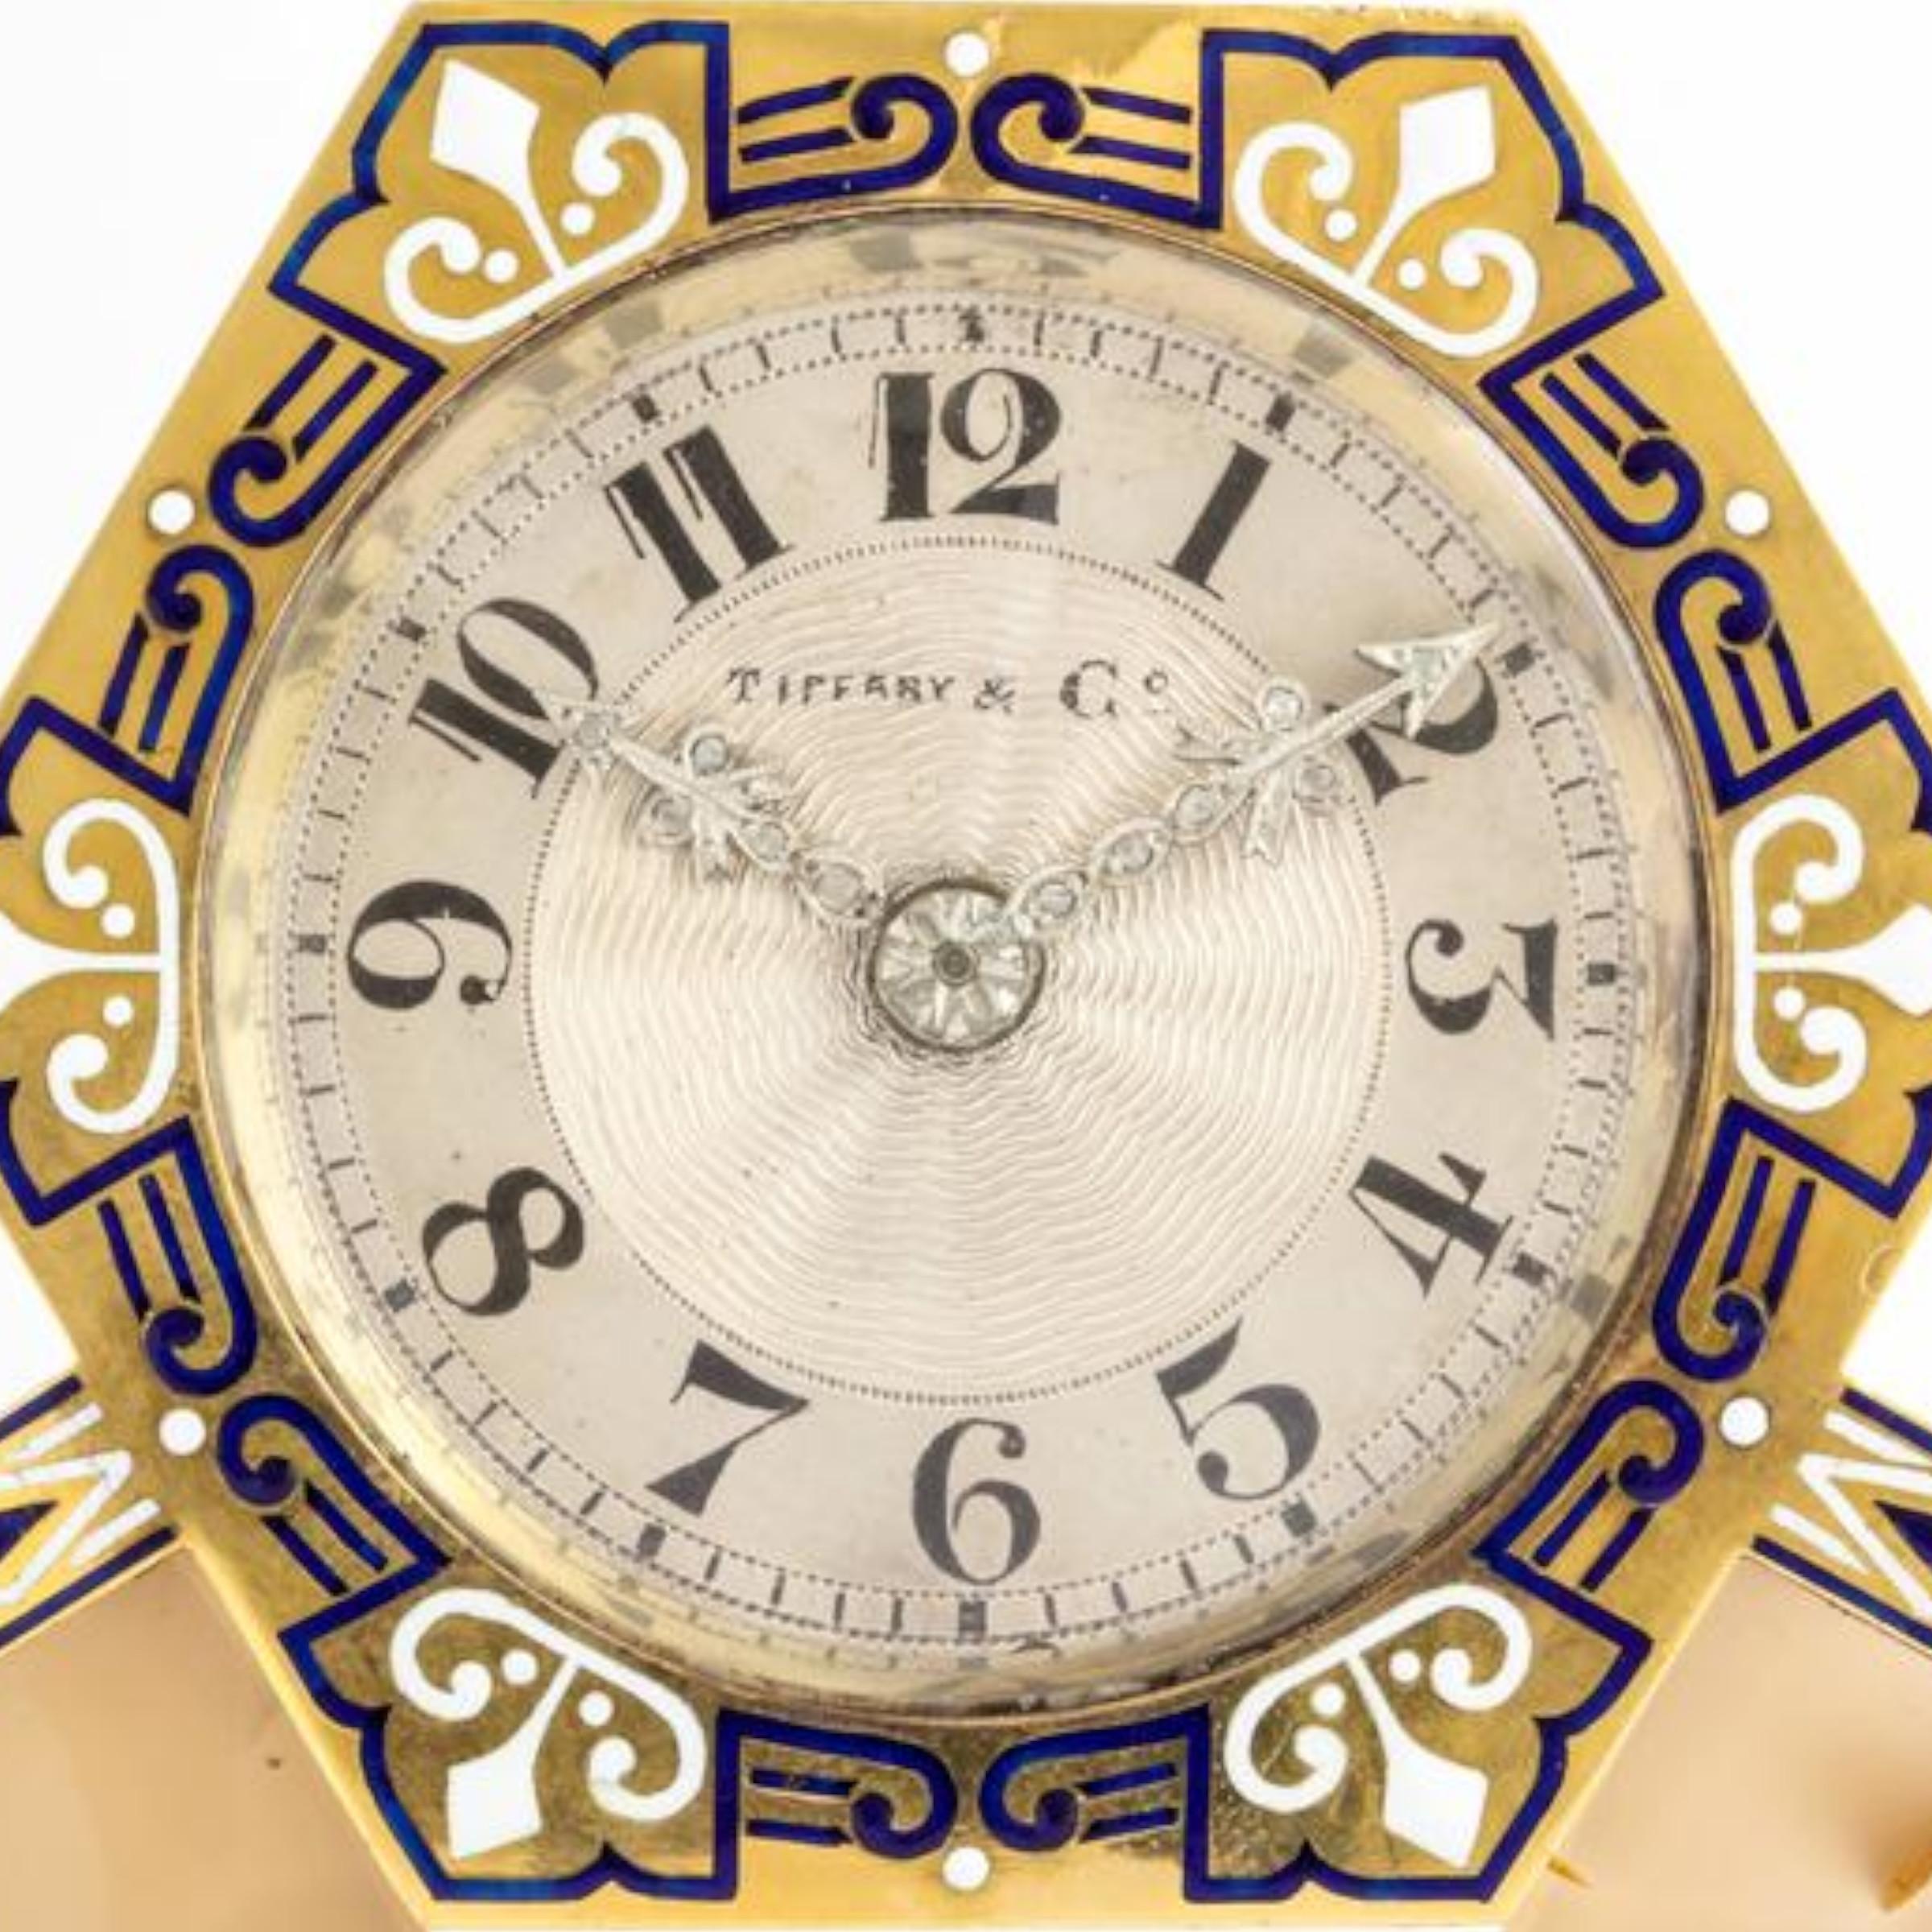 Art Deco Tiffany and Co Clock 

Comprised of: gold, silver, carved hardstone, old cut diamonds, and blue and white enamel.

Made circa 1925

Dial signed Tiffany & Co. French maker's Mark stamps

Depicted in full page spread in the 